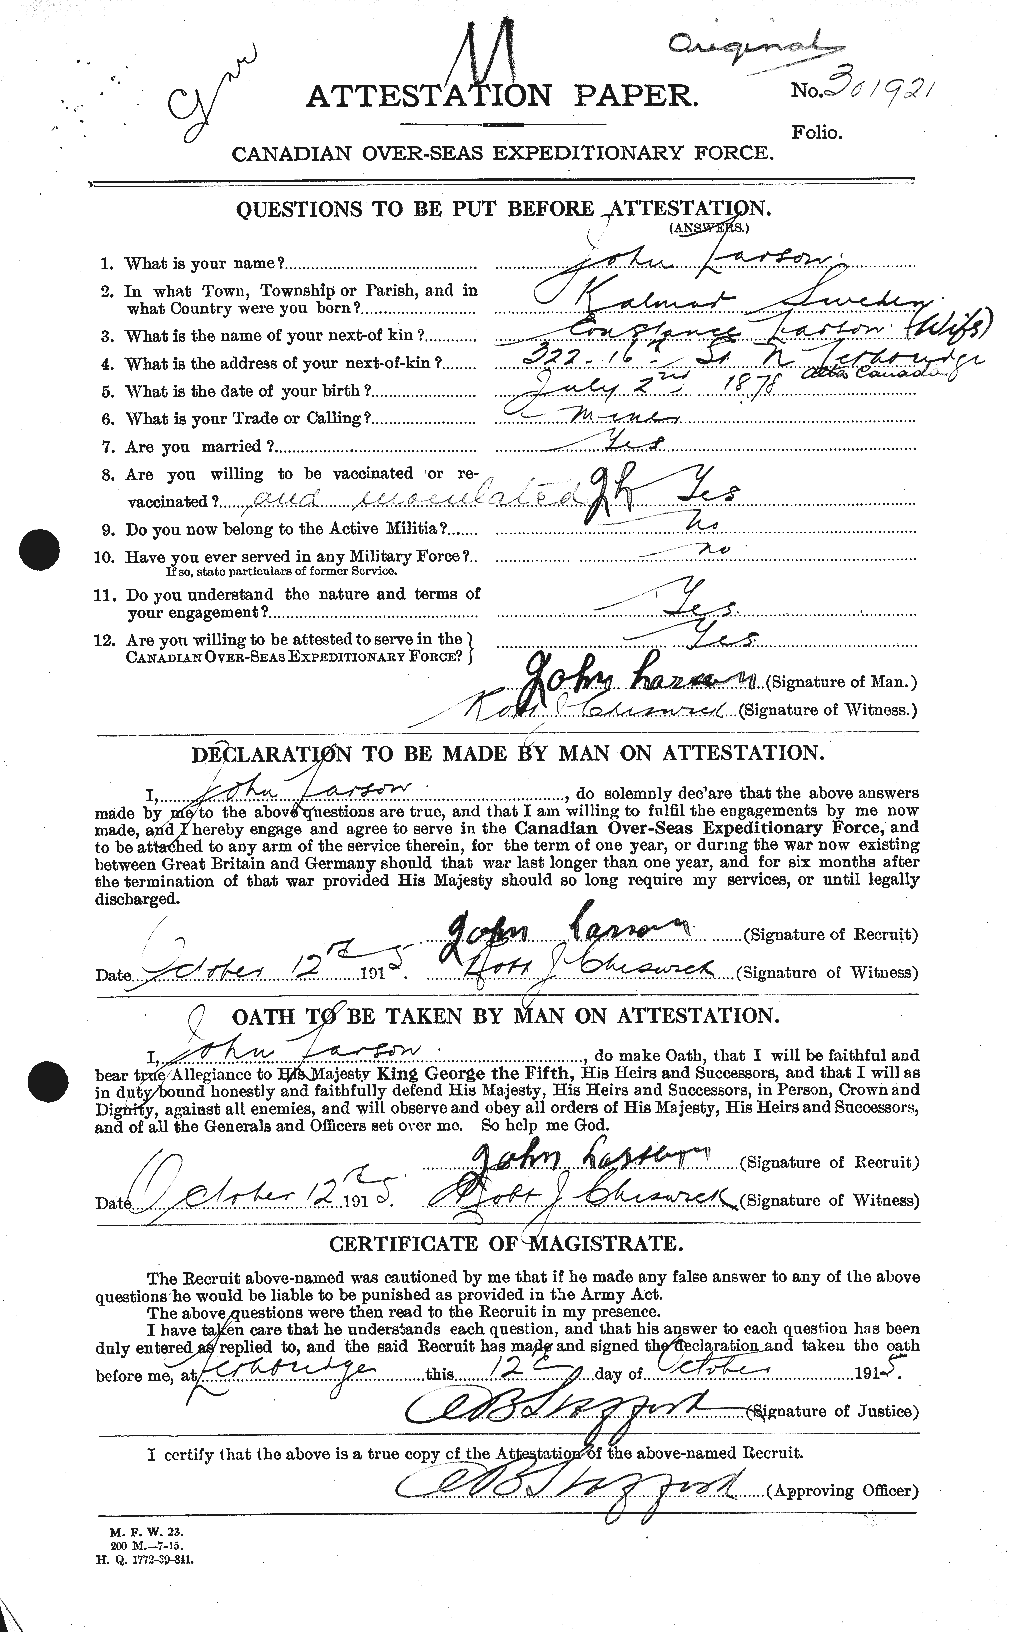 Personnel Records of the First World War - CEF 451719a